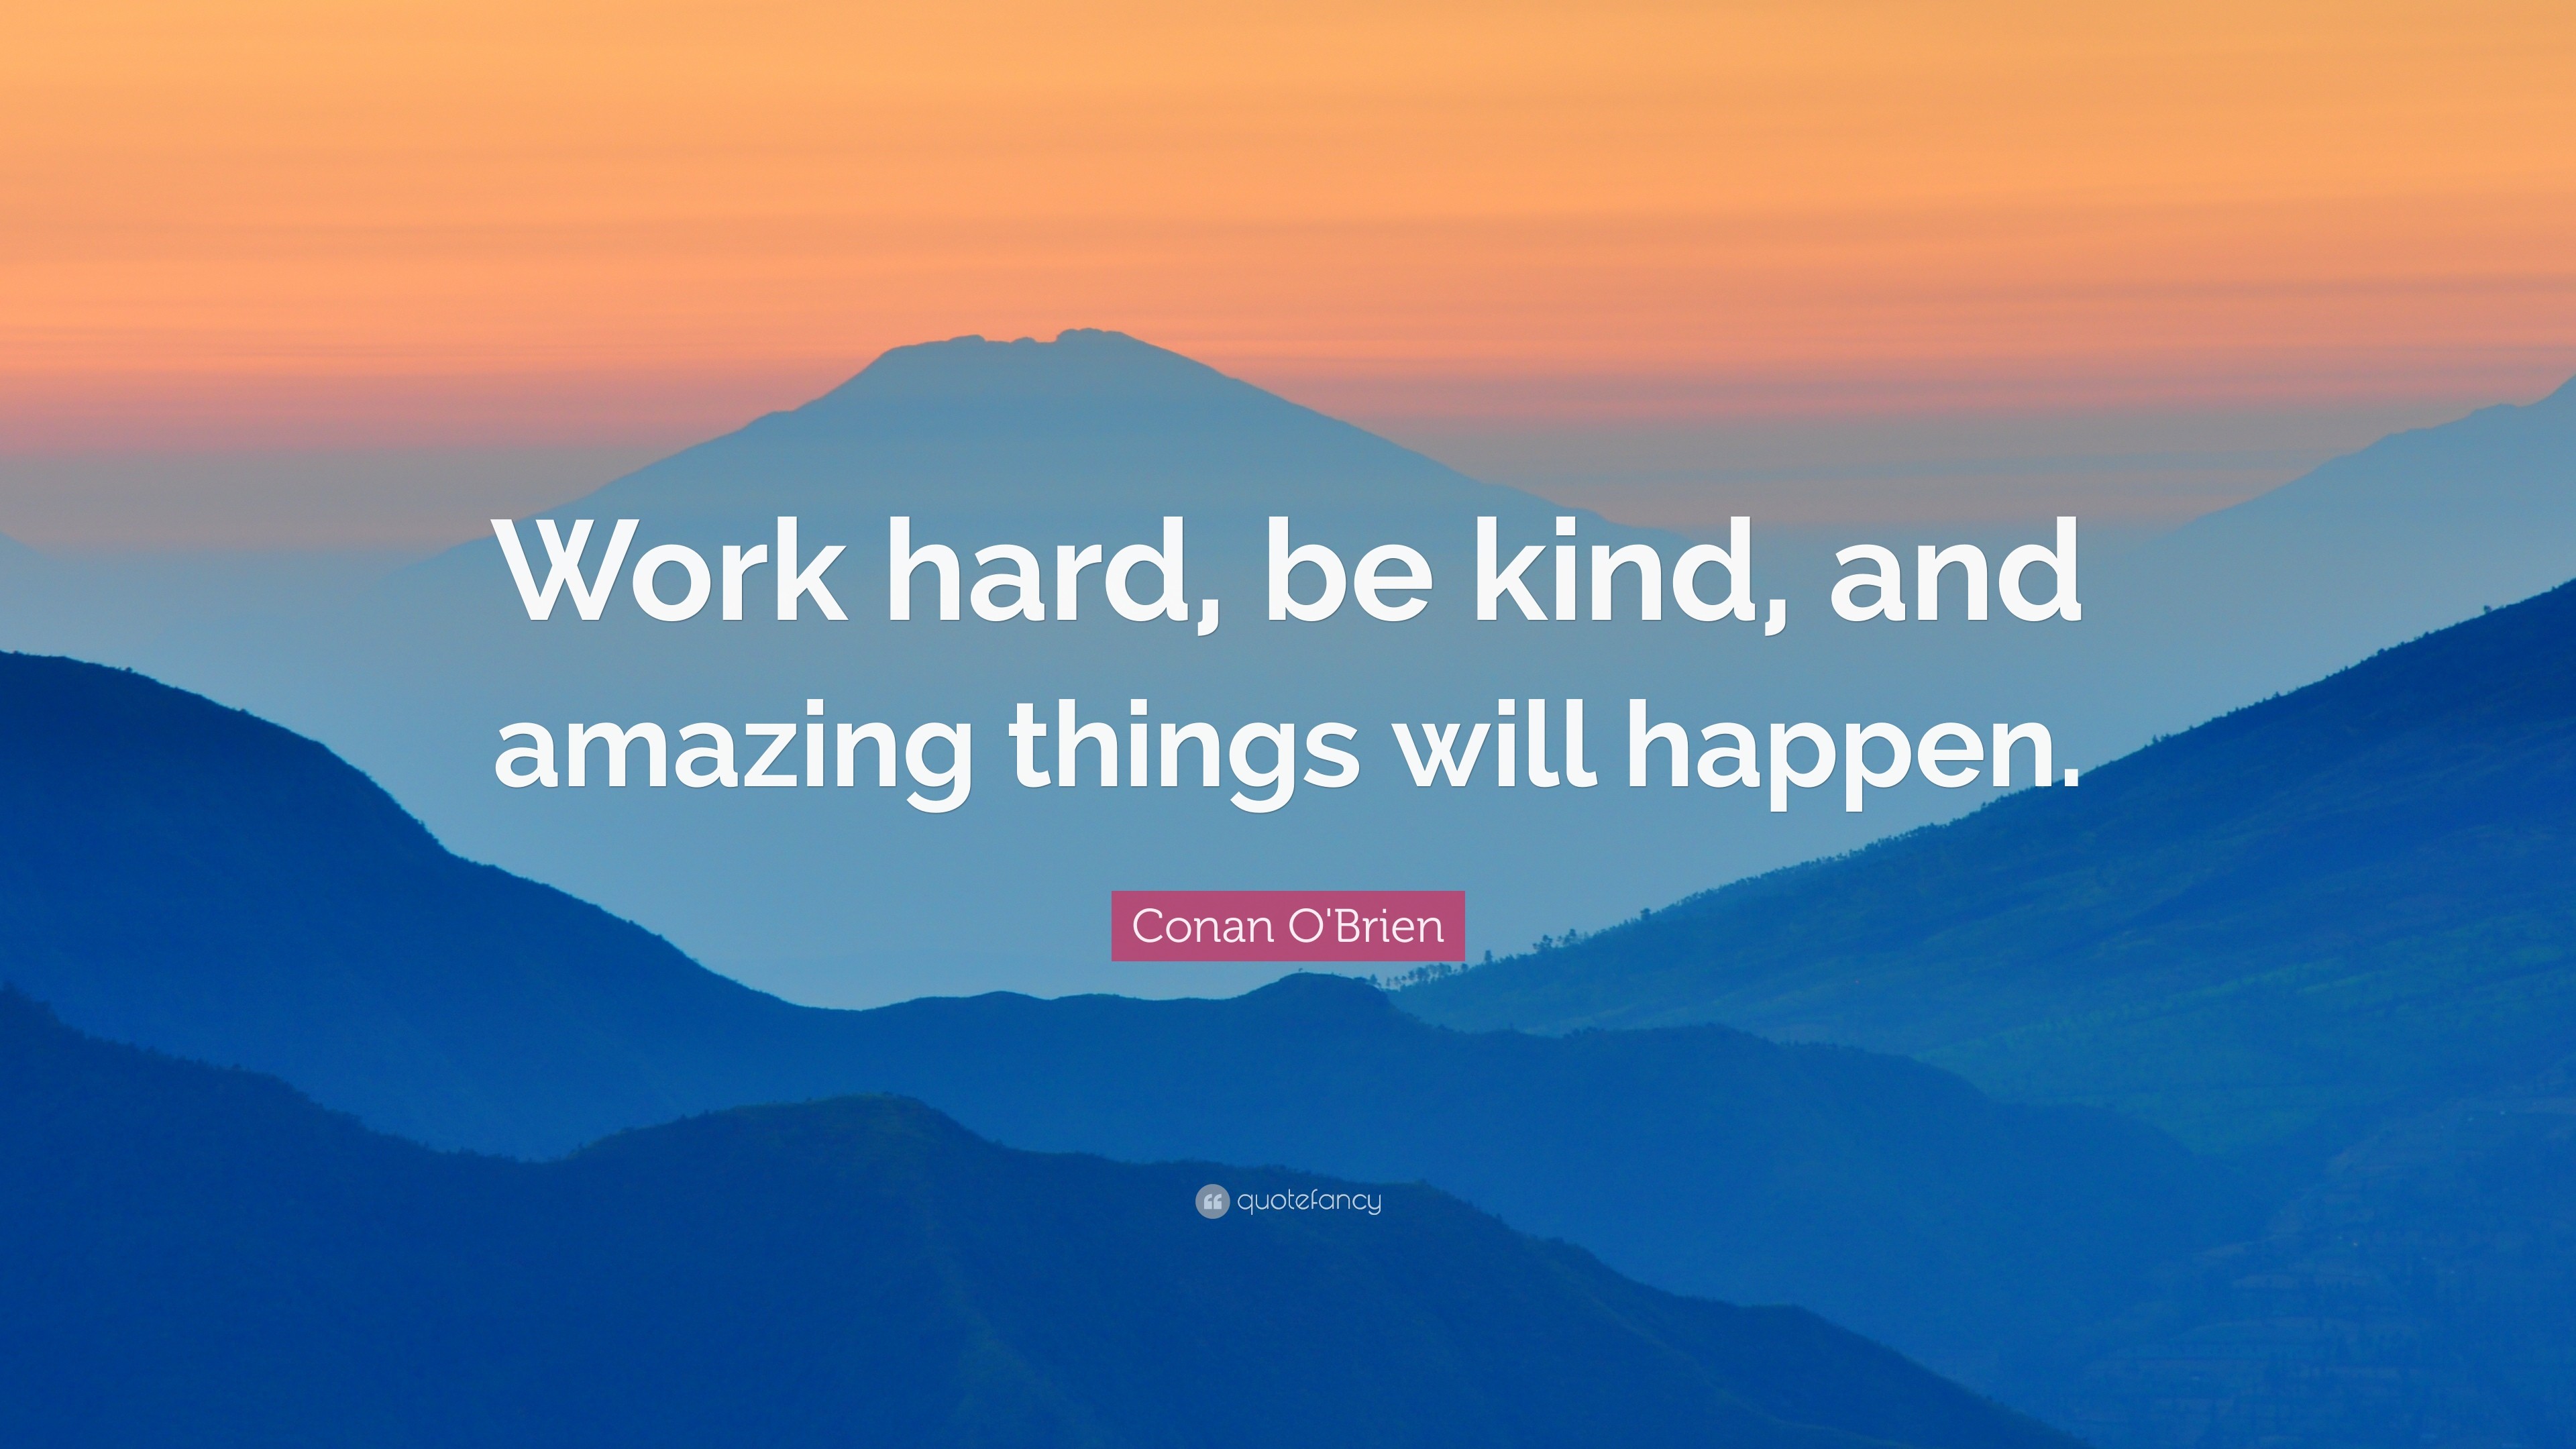 3840x2160 Conan O'Brien Quote: “Work hard, be kind, and amazing things